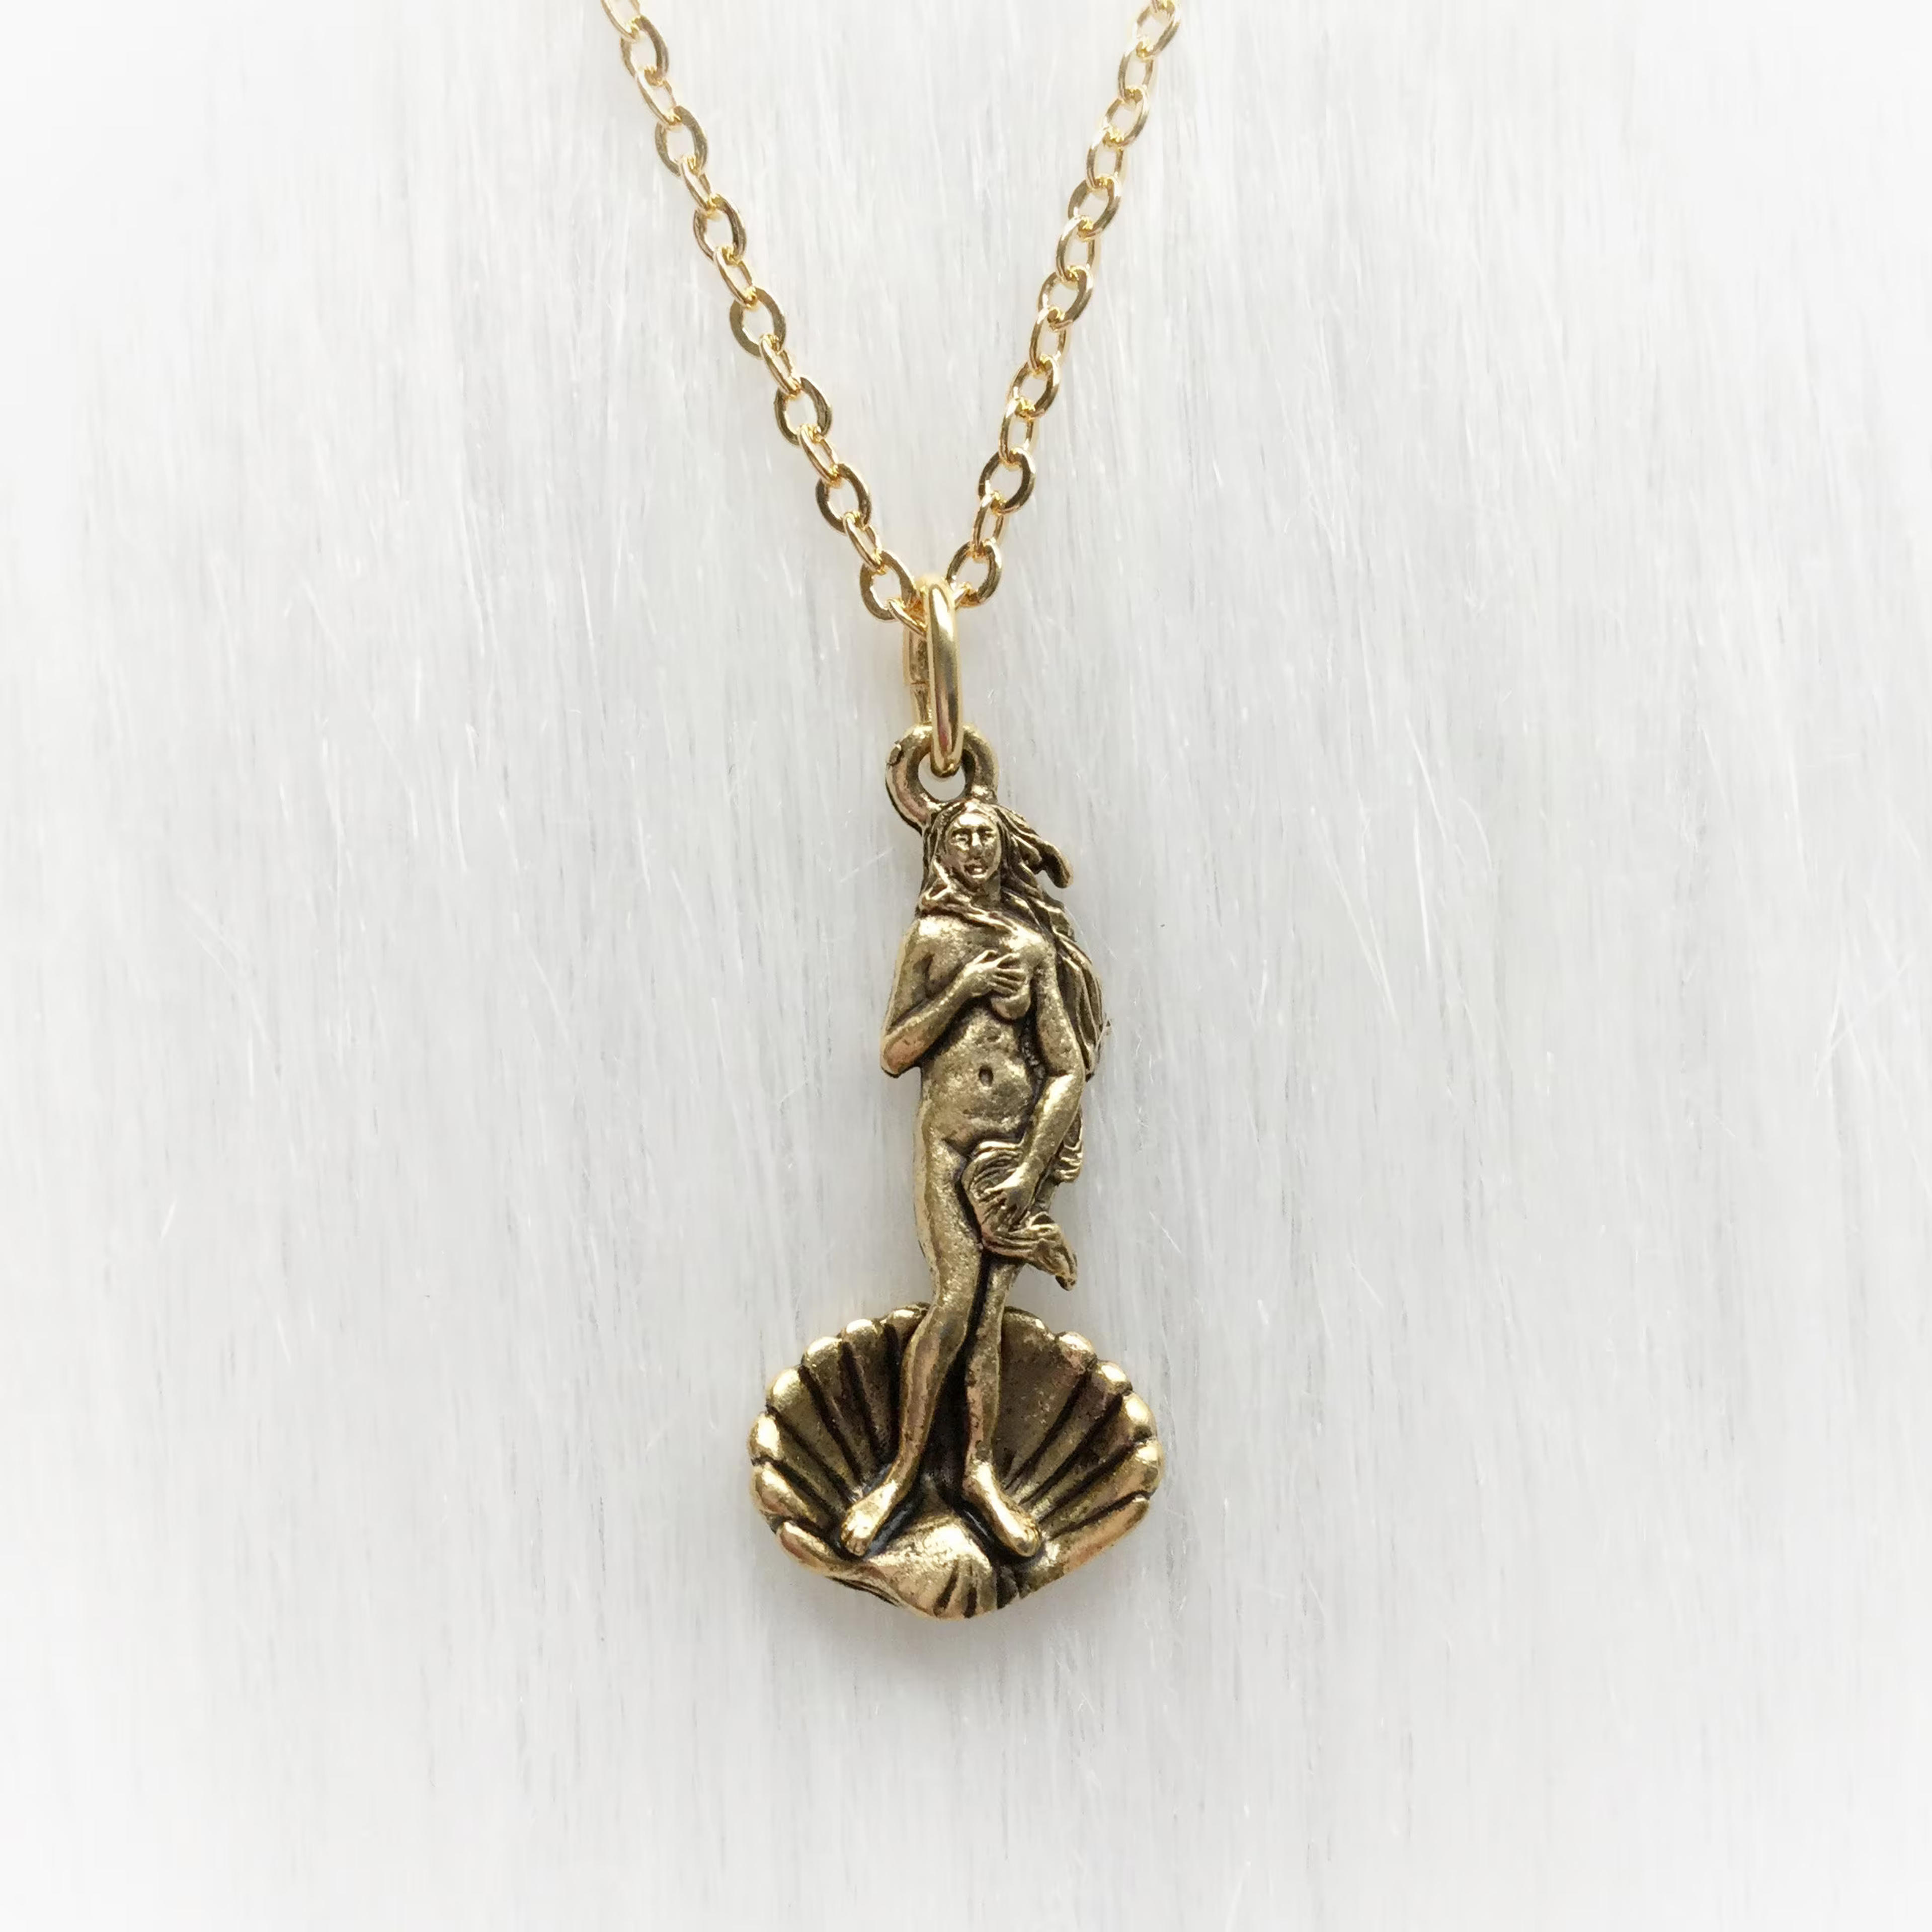 Birth of Venus Necklace in Silver or Gold Aphrodite Goddess